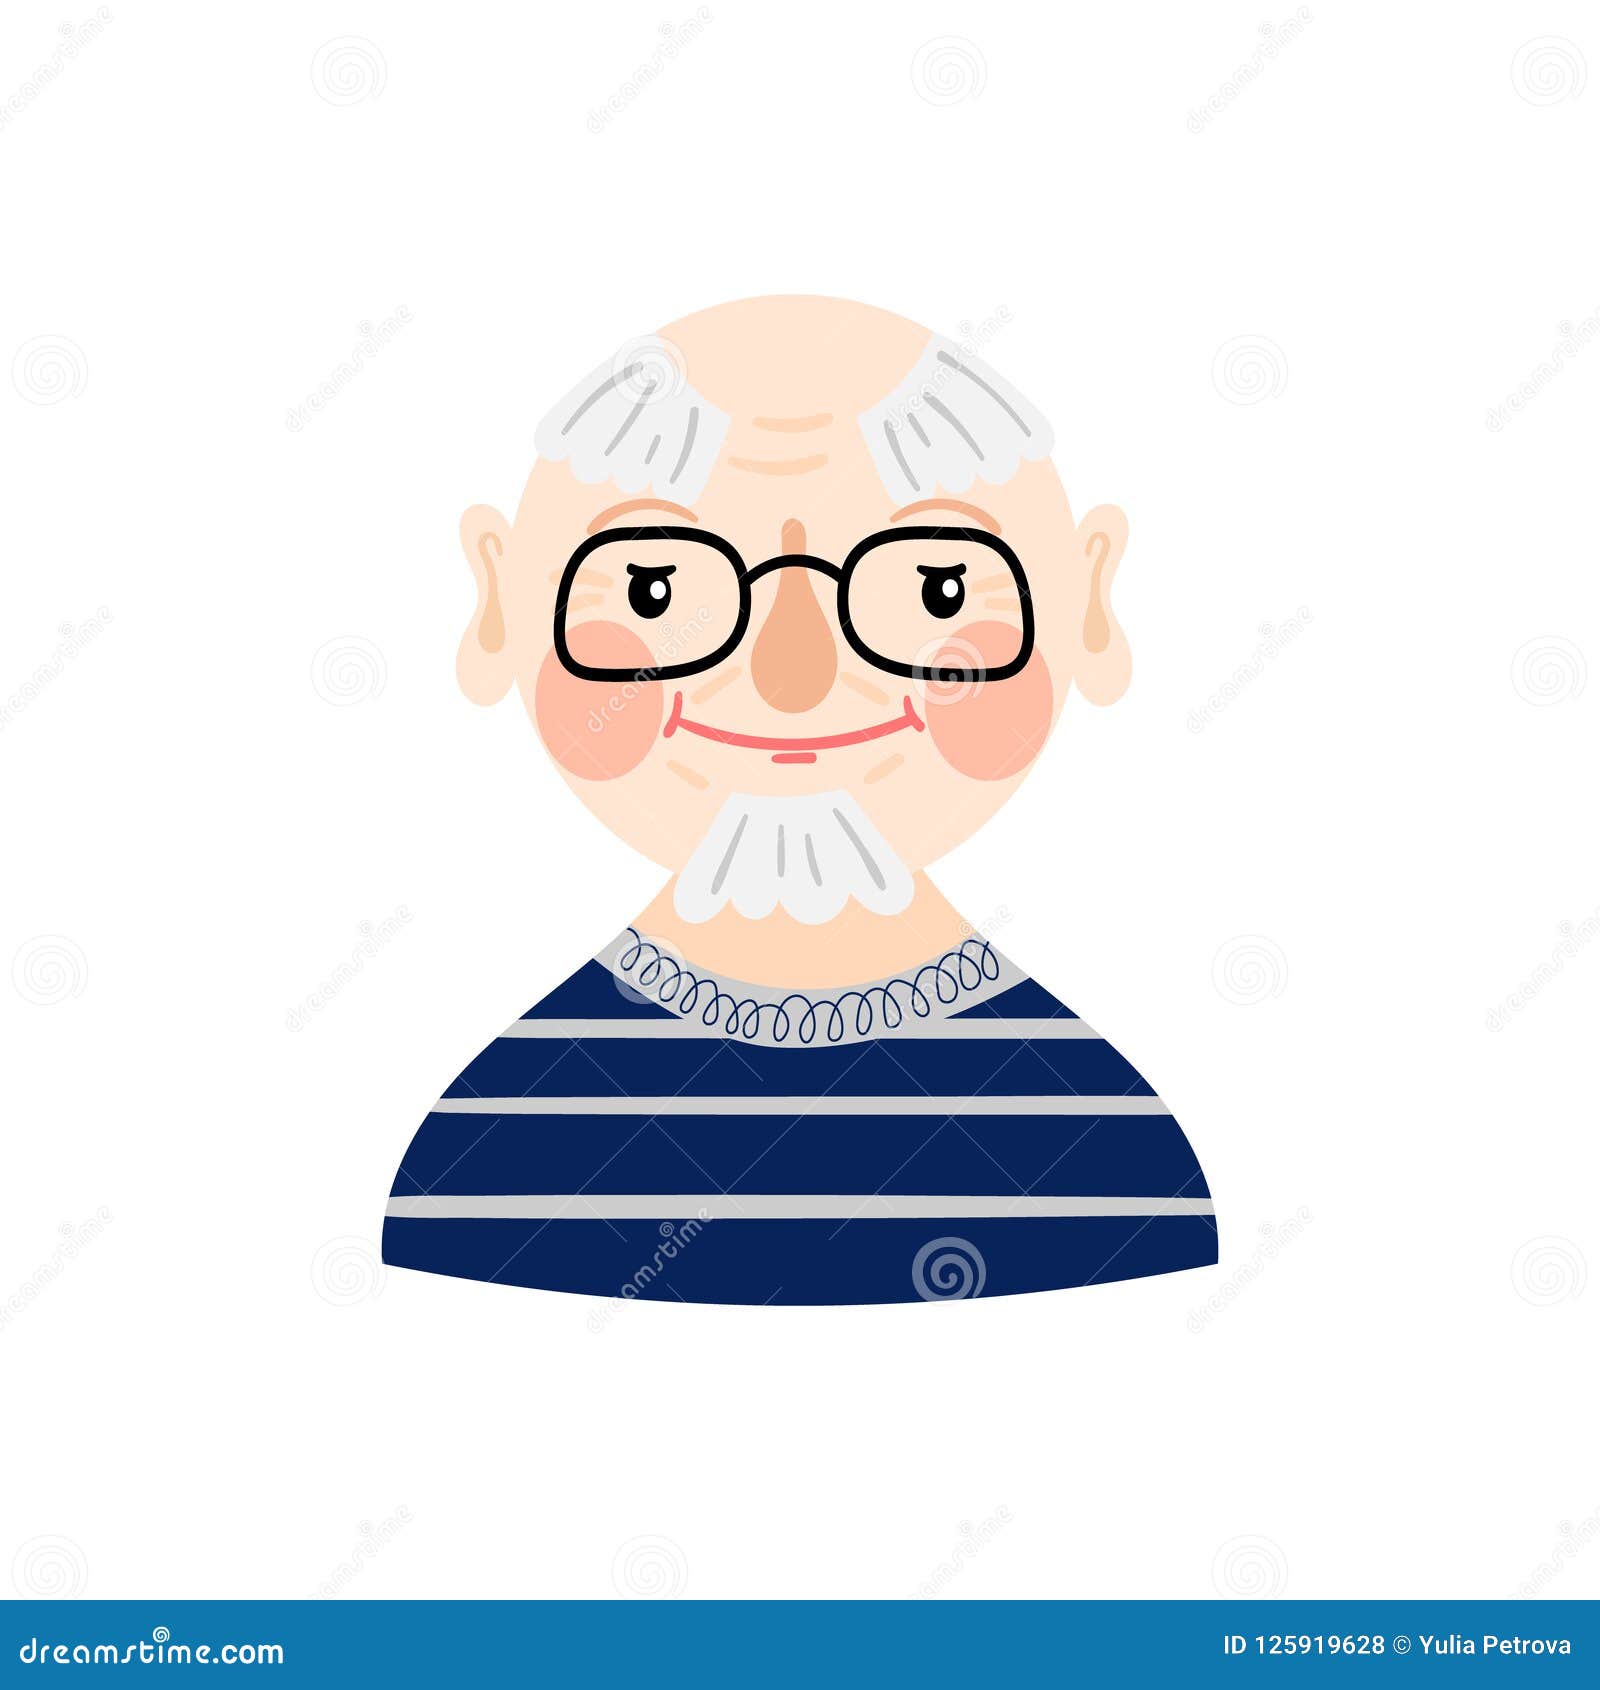 Illustration with Grandfather Face Stock Vector - Illustration of adult,  design: 125919628